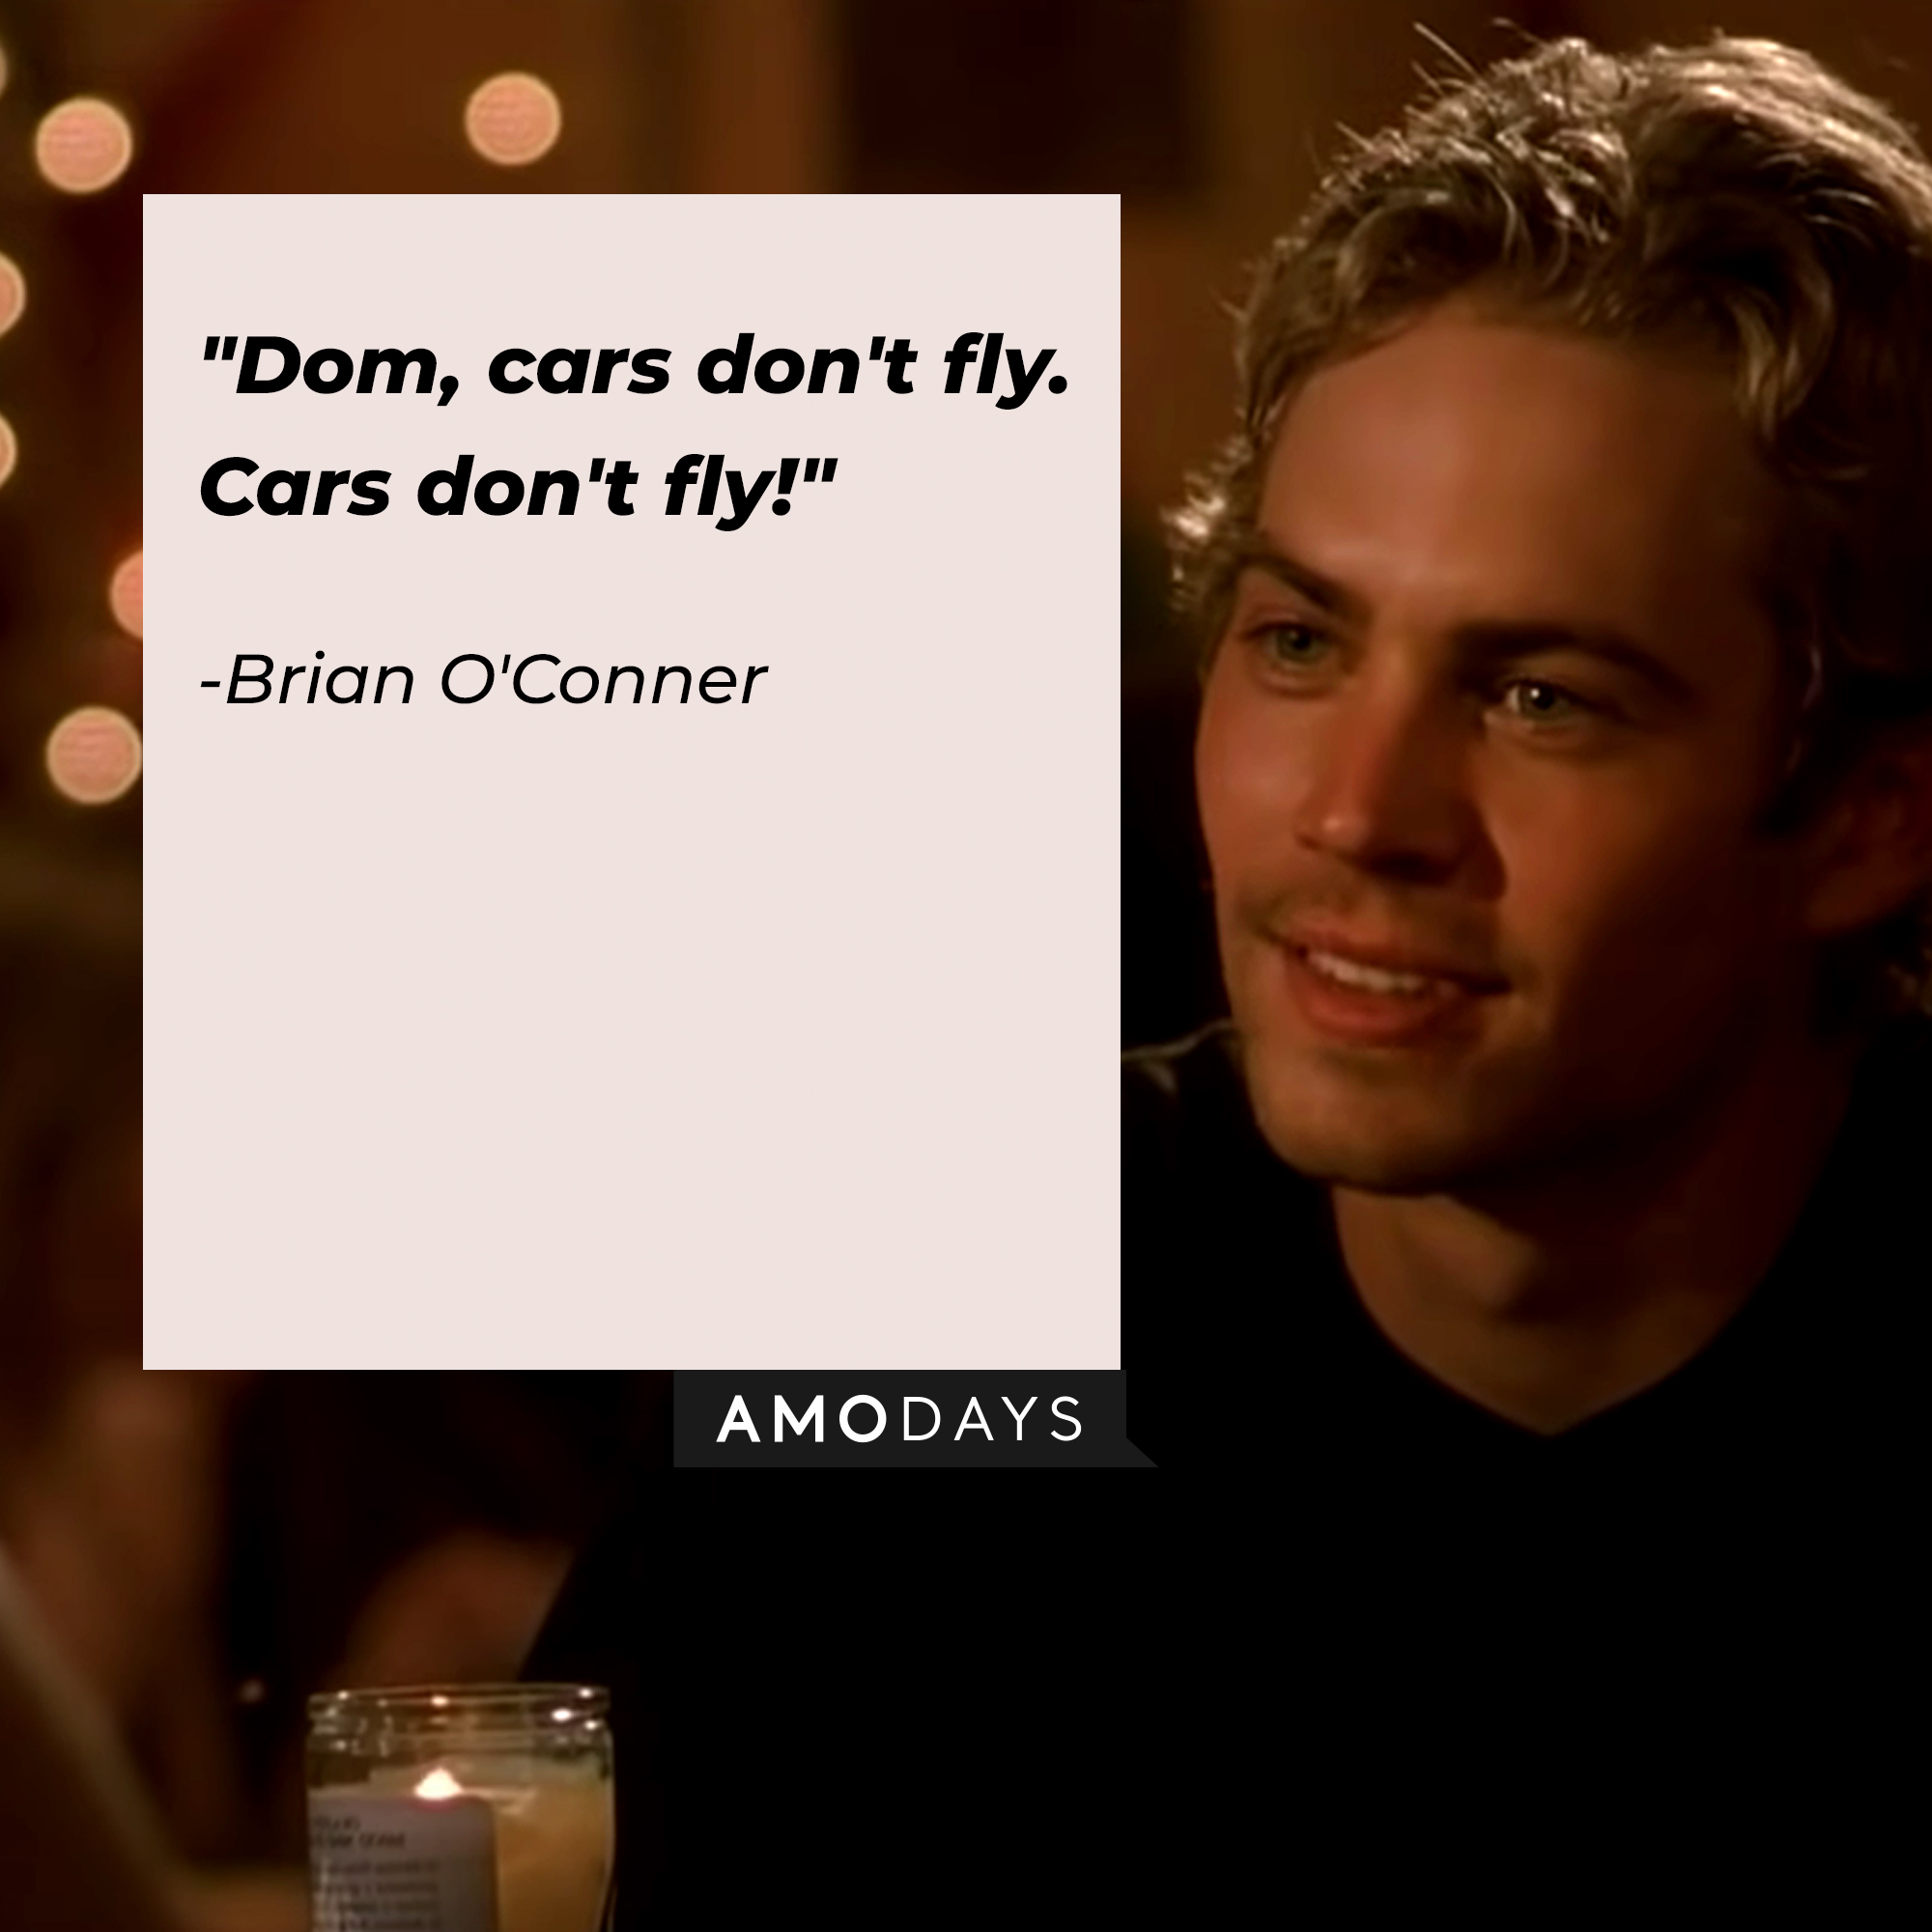 Brian O'Conner, with his quote: "Dom, cars don't fly. Cars don't fly!” | Source: facebook.com/TheFastSaga